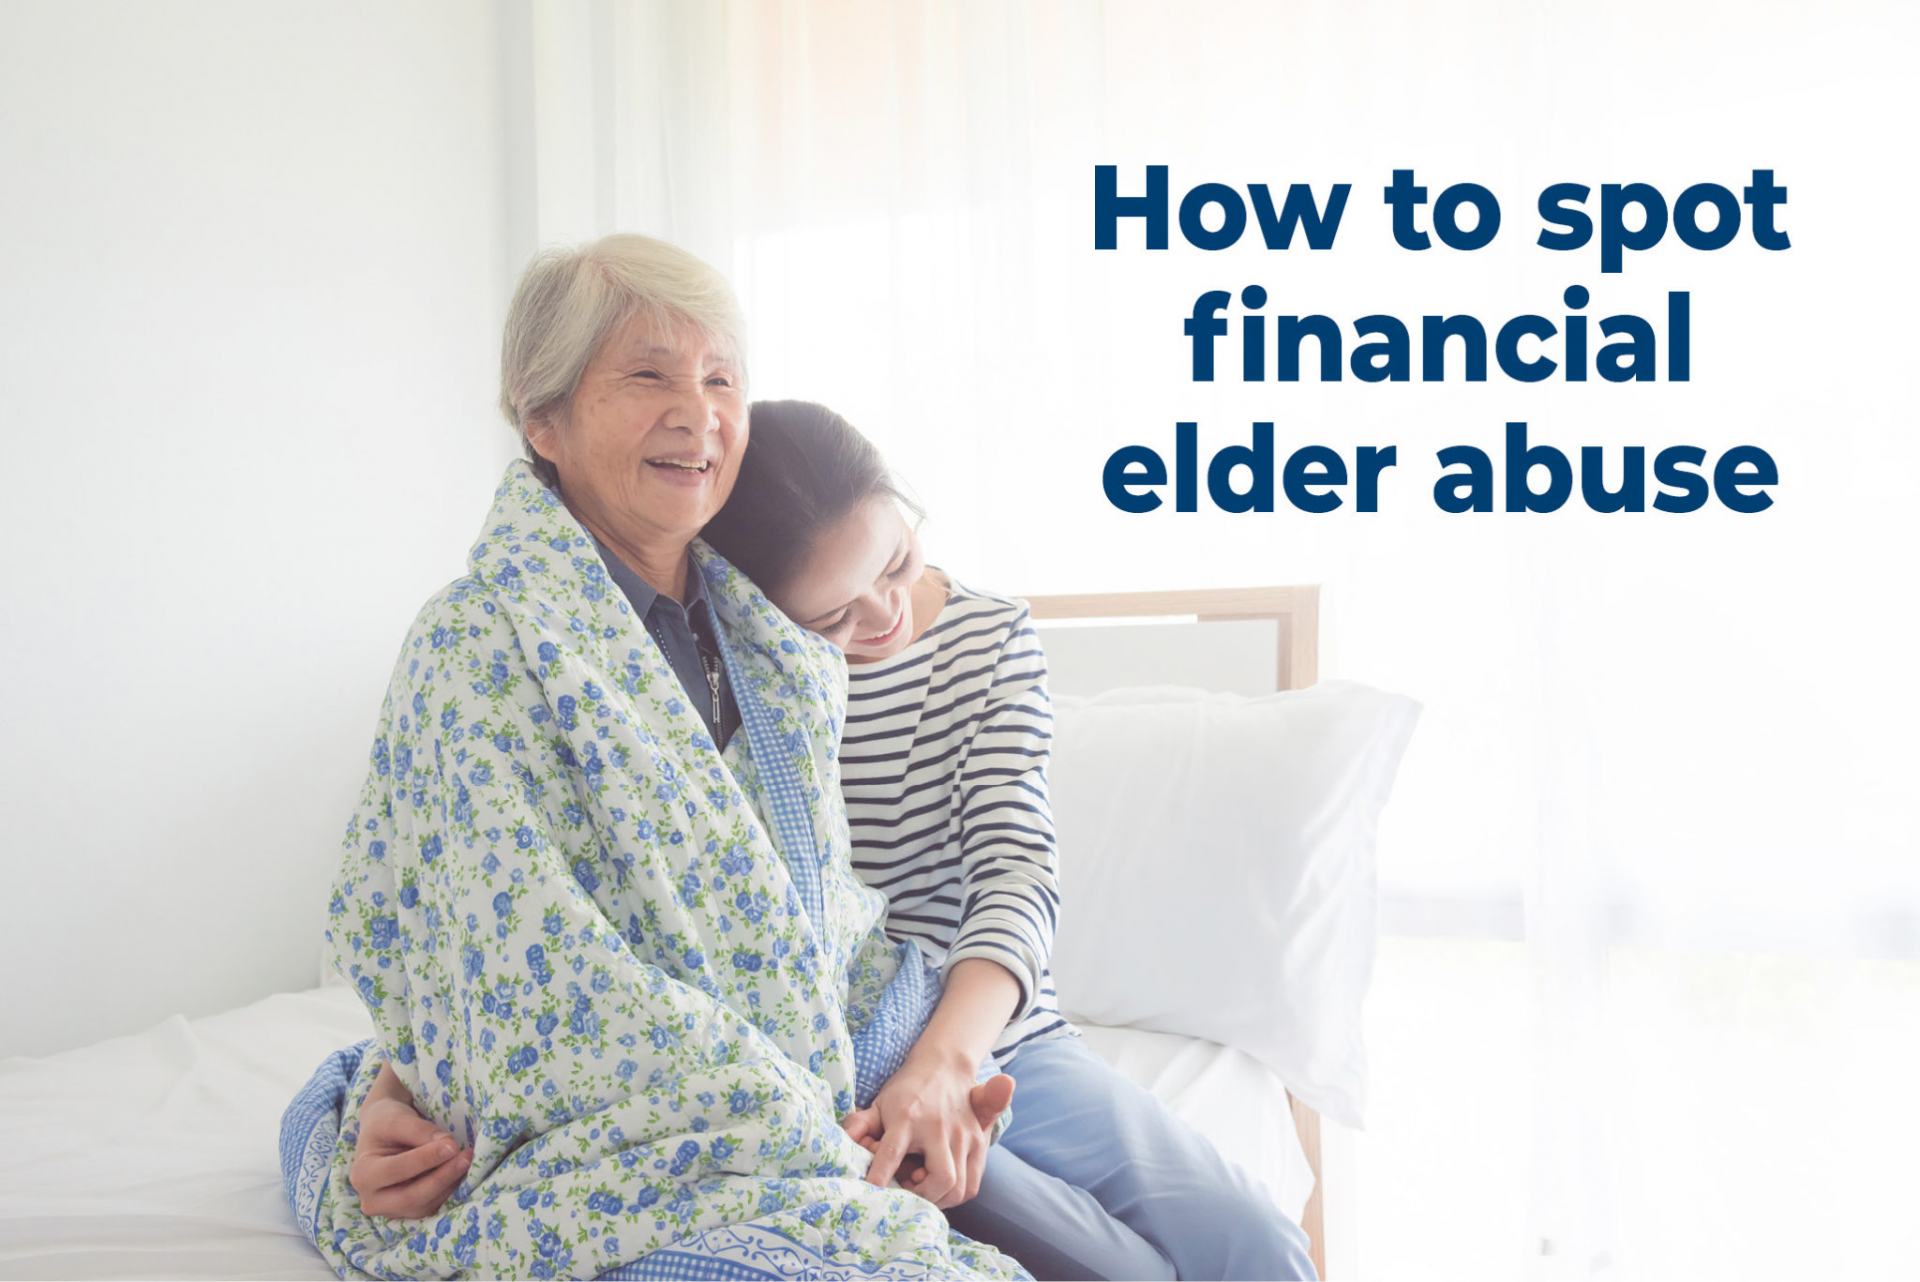 How to spot financial elder abuse